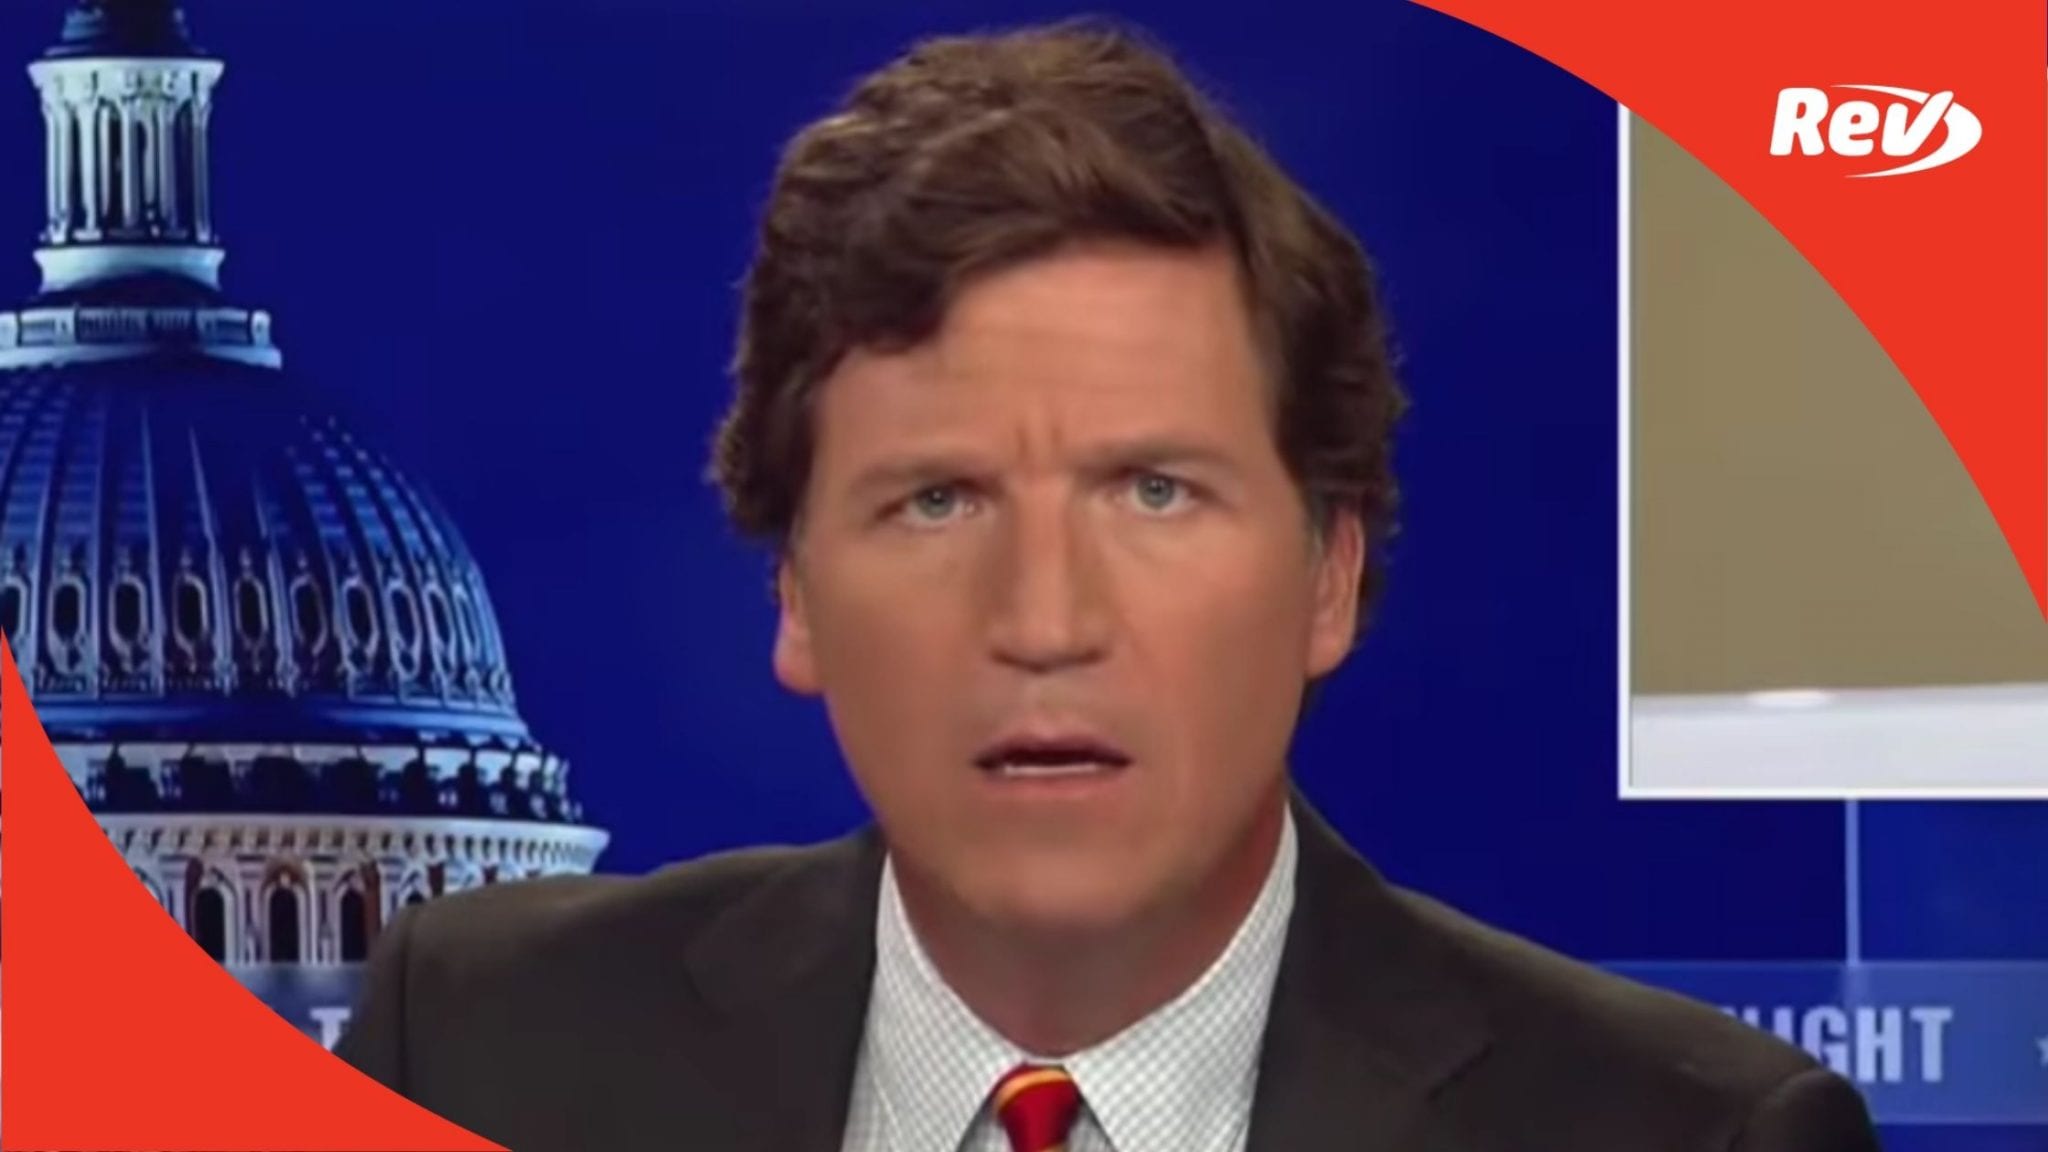 Tucker Carlson Speech Transcript: "Contact Child Protective Services" if Kids Wearing Masks Outside